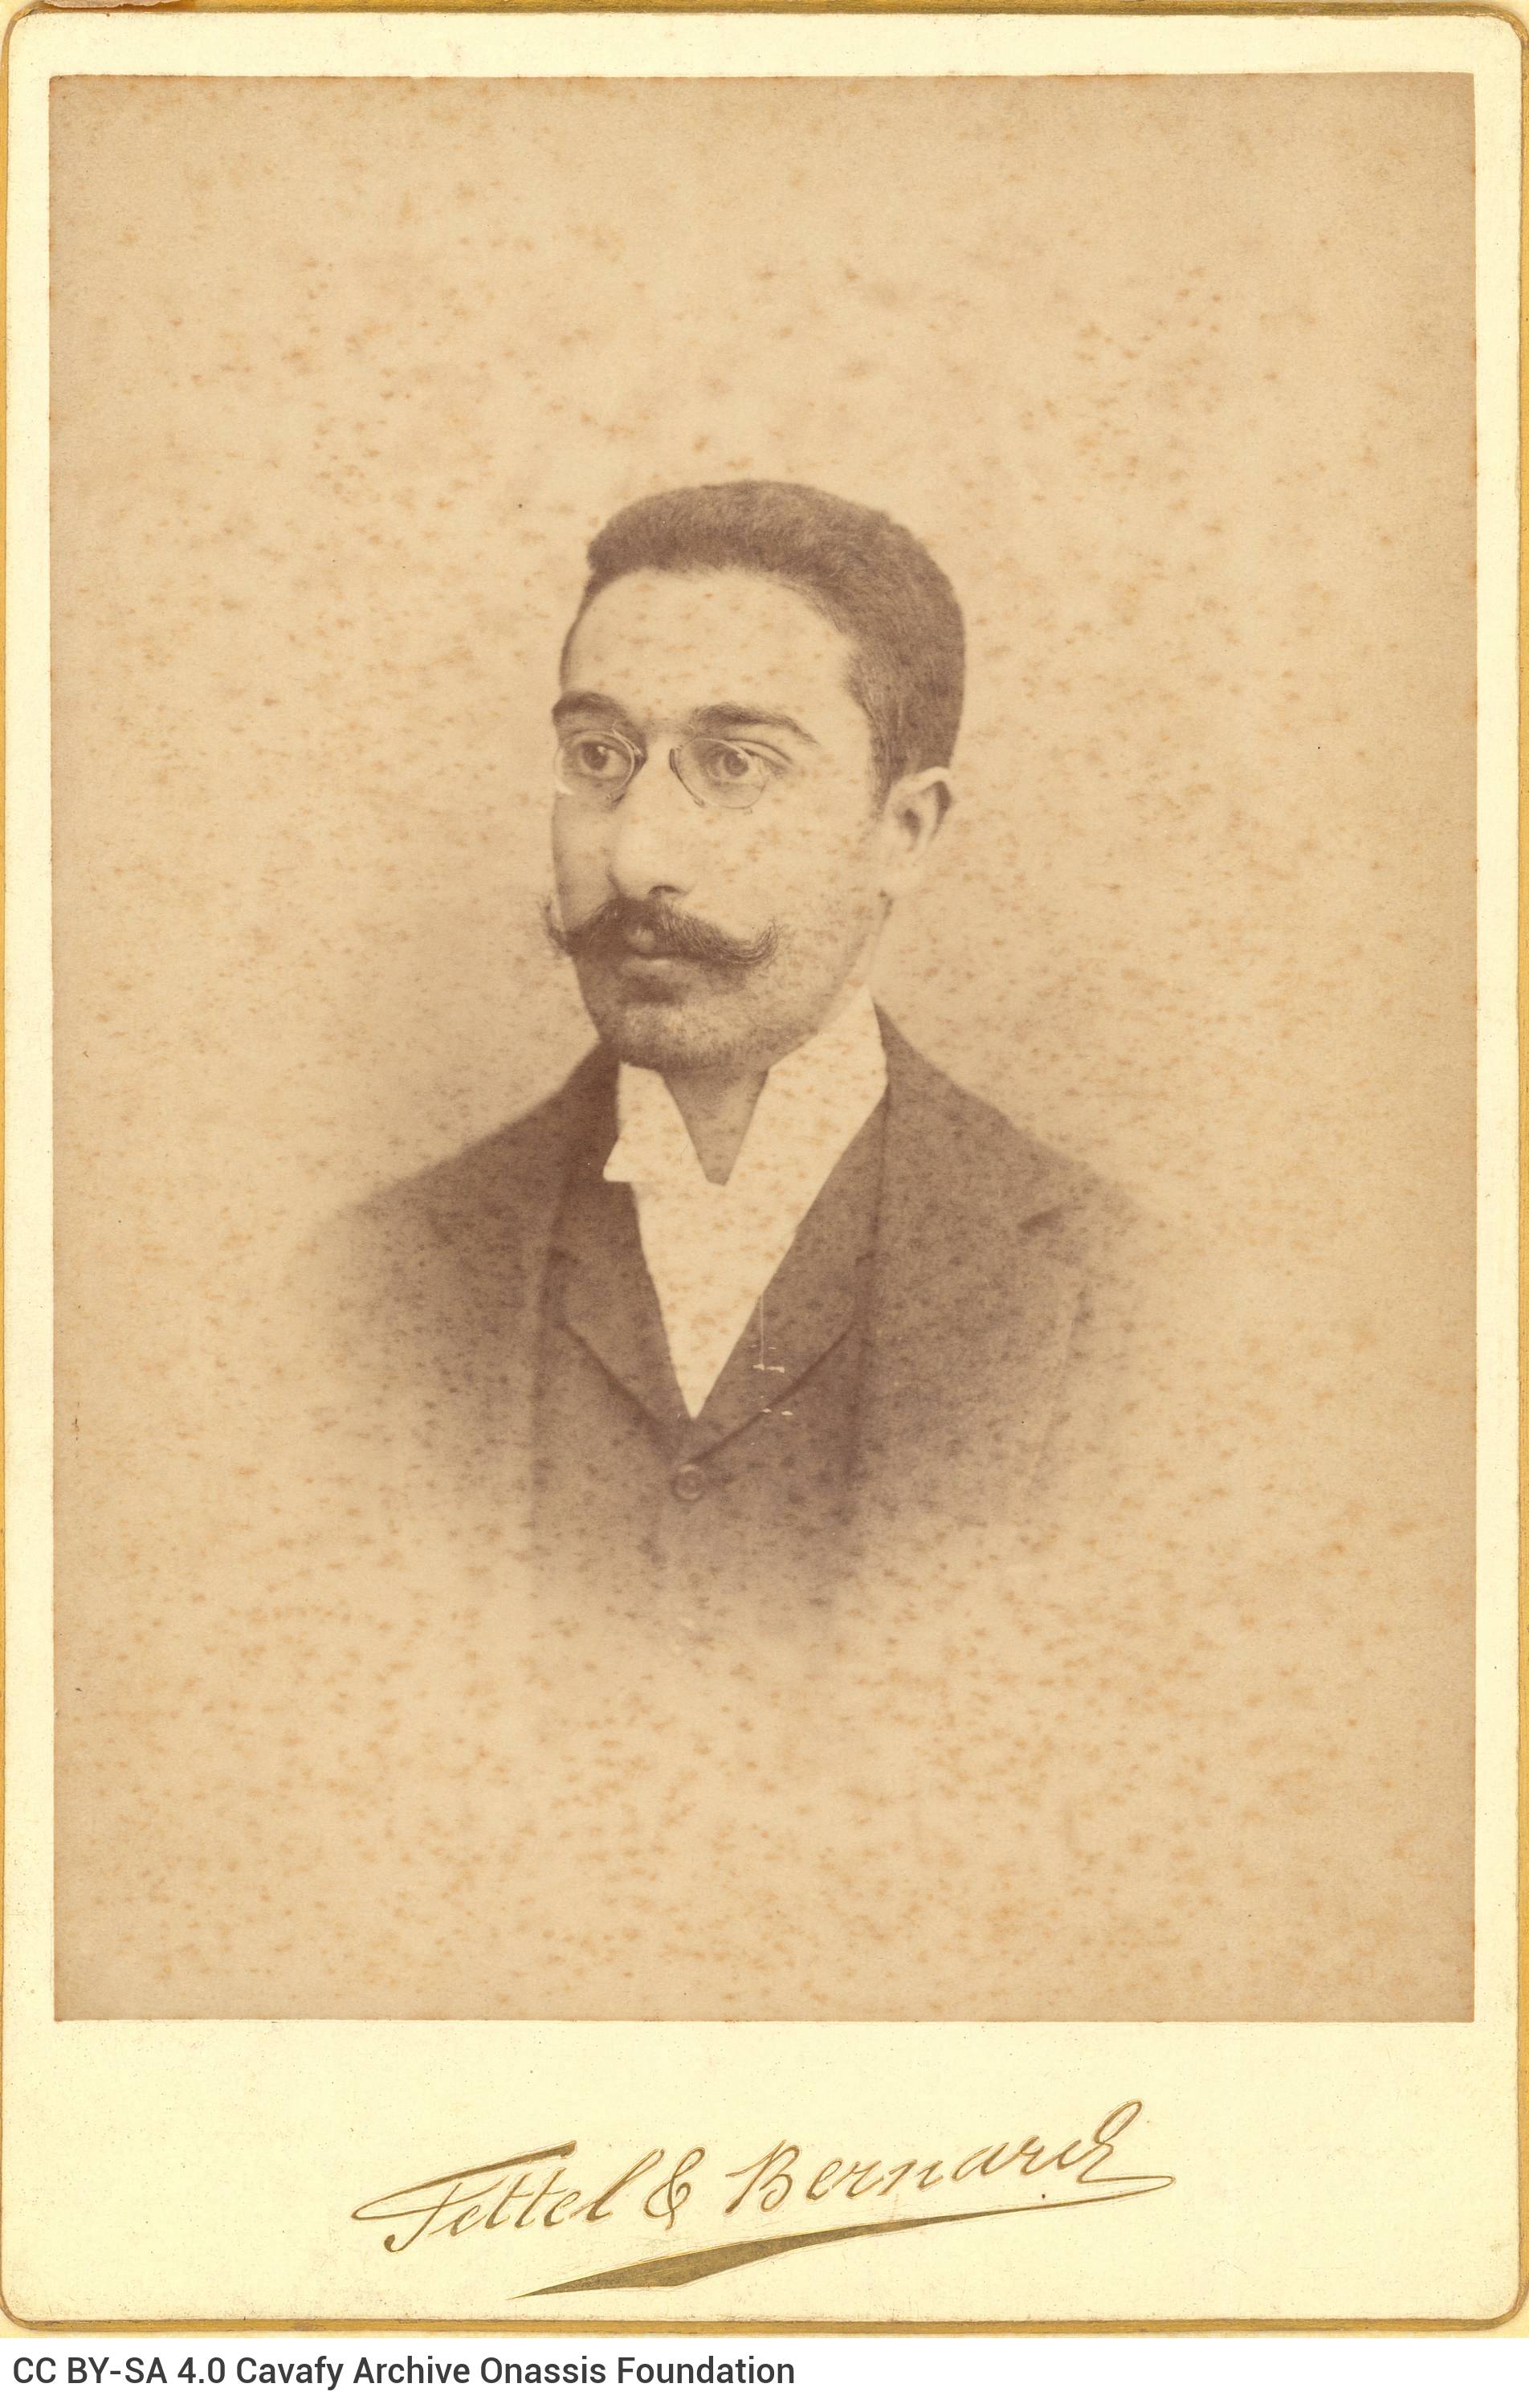 Undated photographic portrait of Cavafy by the photo shop of Fettel & Bernard in Alexandria, in two copies. The poet has shor